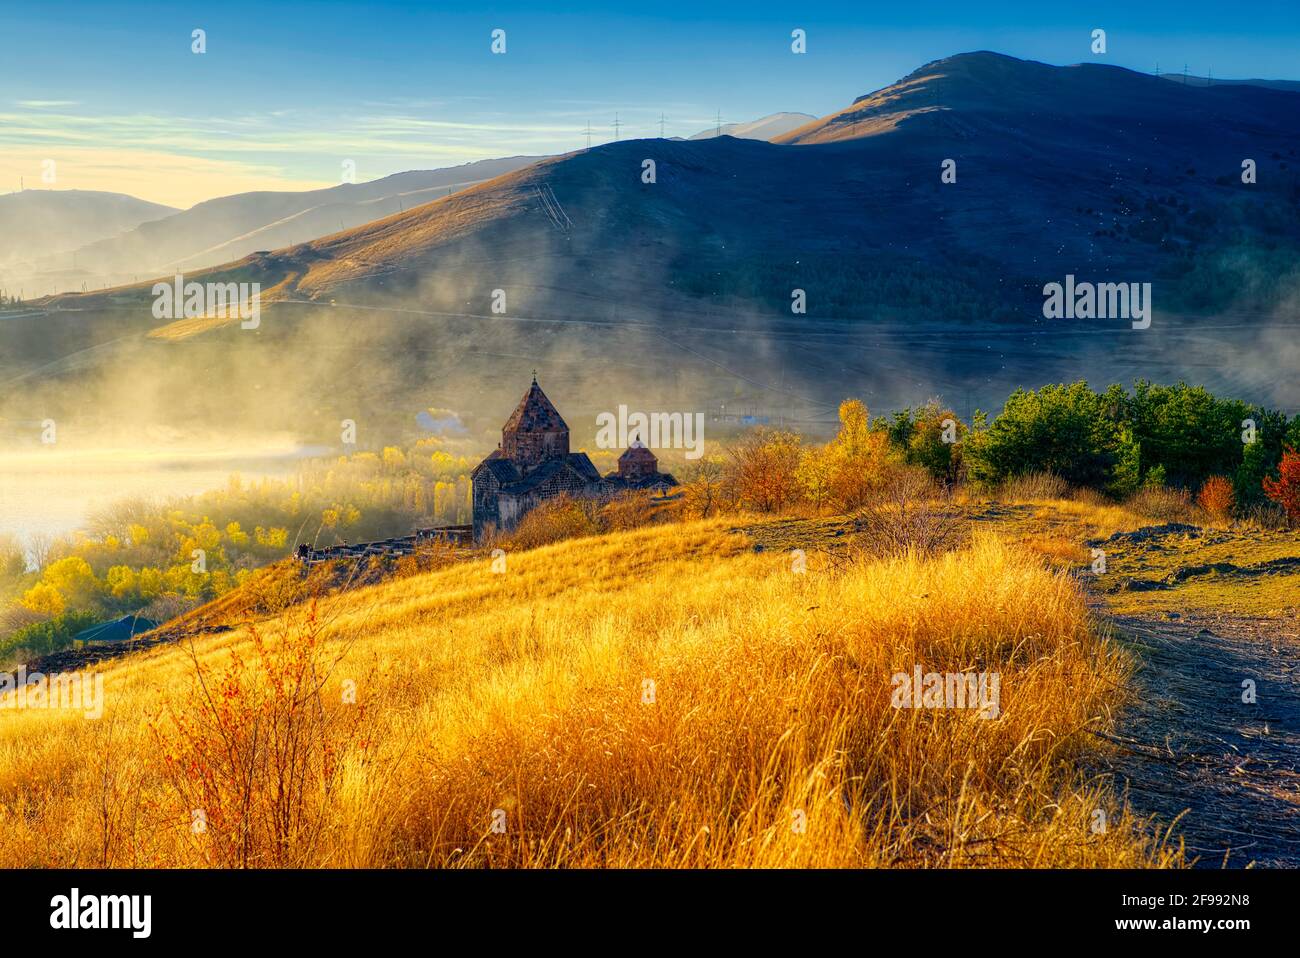 In the northwest part of Sevan Lake, on a narrow rocky peninsula, there stands one of the most prominent examples of medieval Armenian architecture – Stock Photo